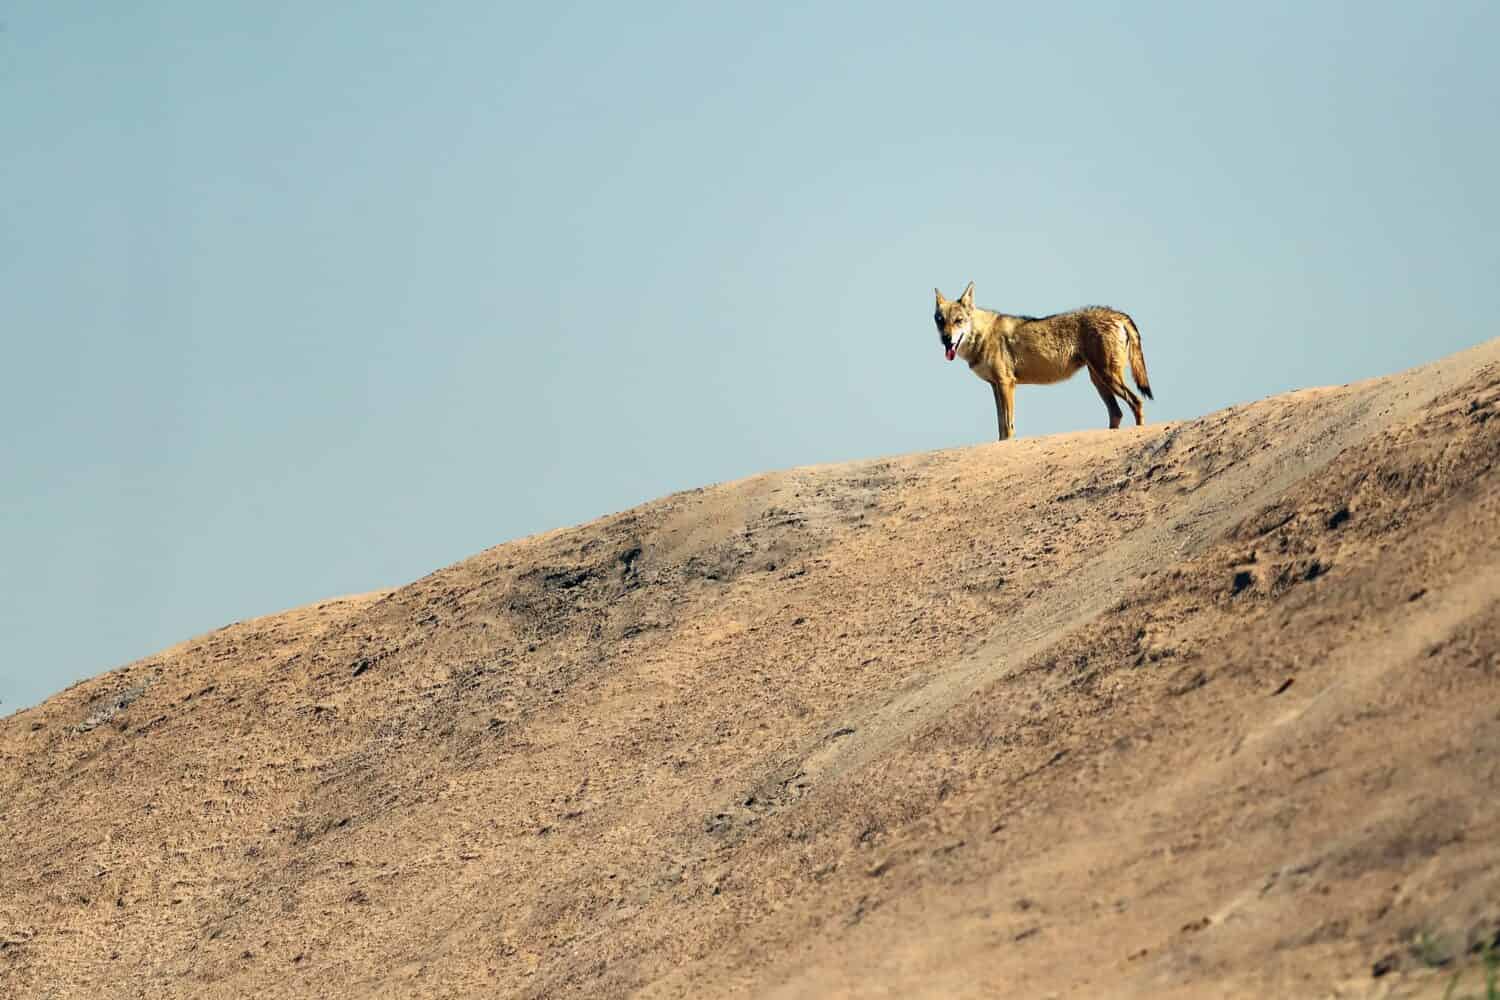 The Arabian wolf (Canis lupus arabs) standing on a high dune with a blue sky in the background.